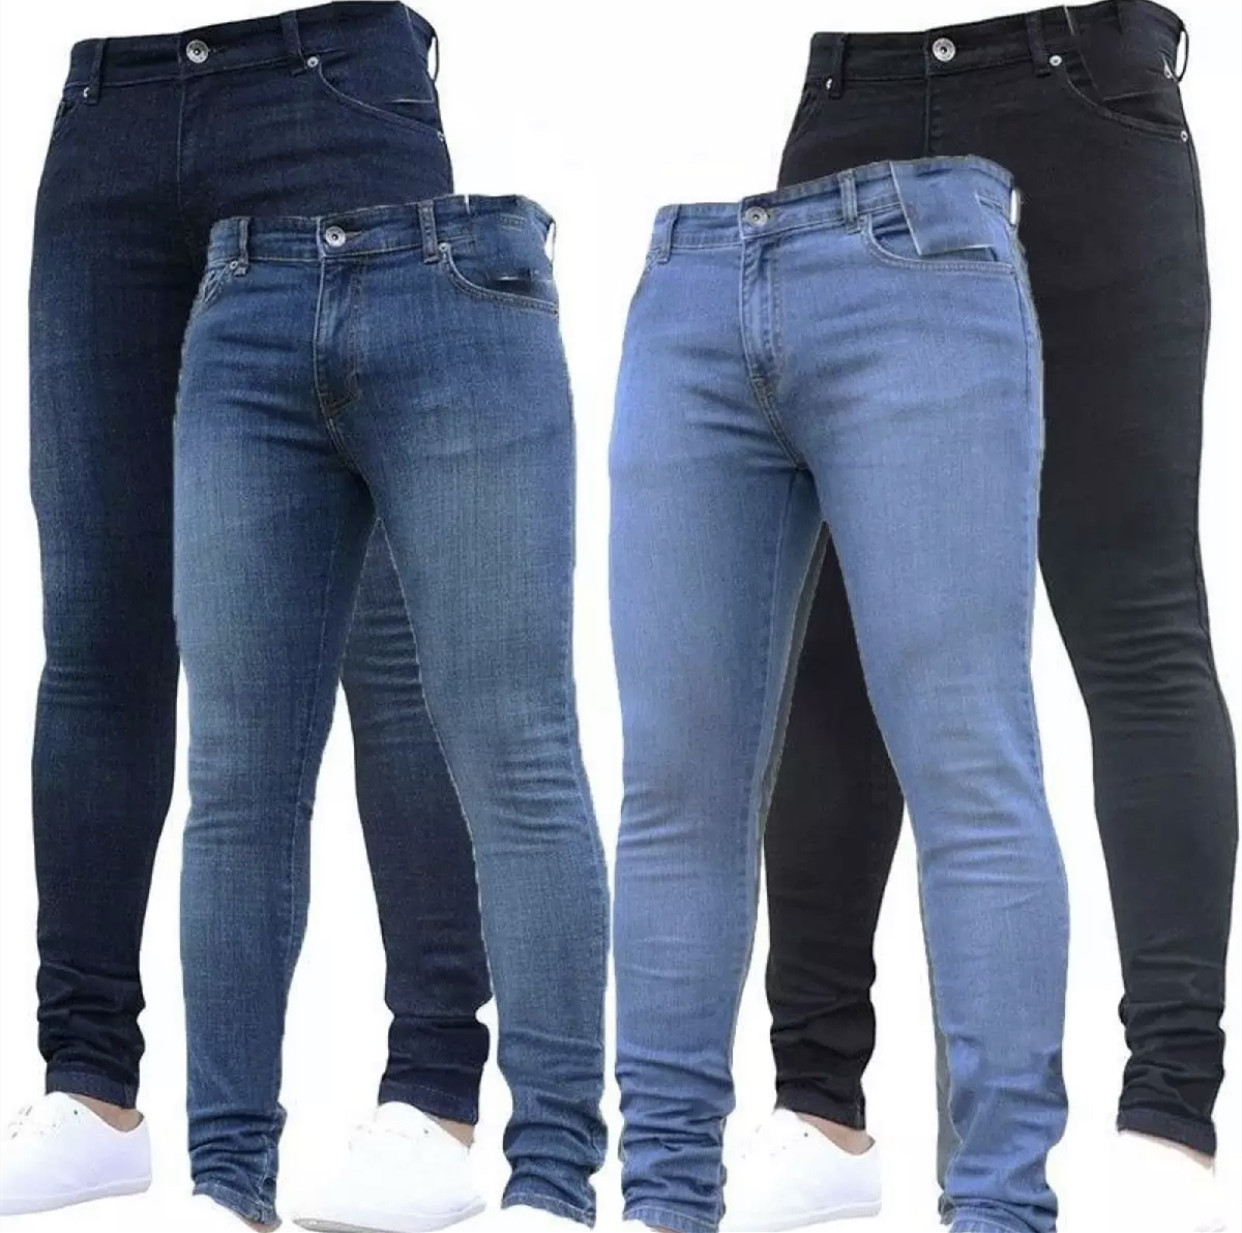 Buy Jeans At Best Price Online Lazada Com Ph - black fade pants roblox